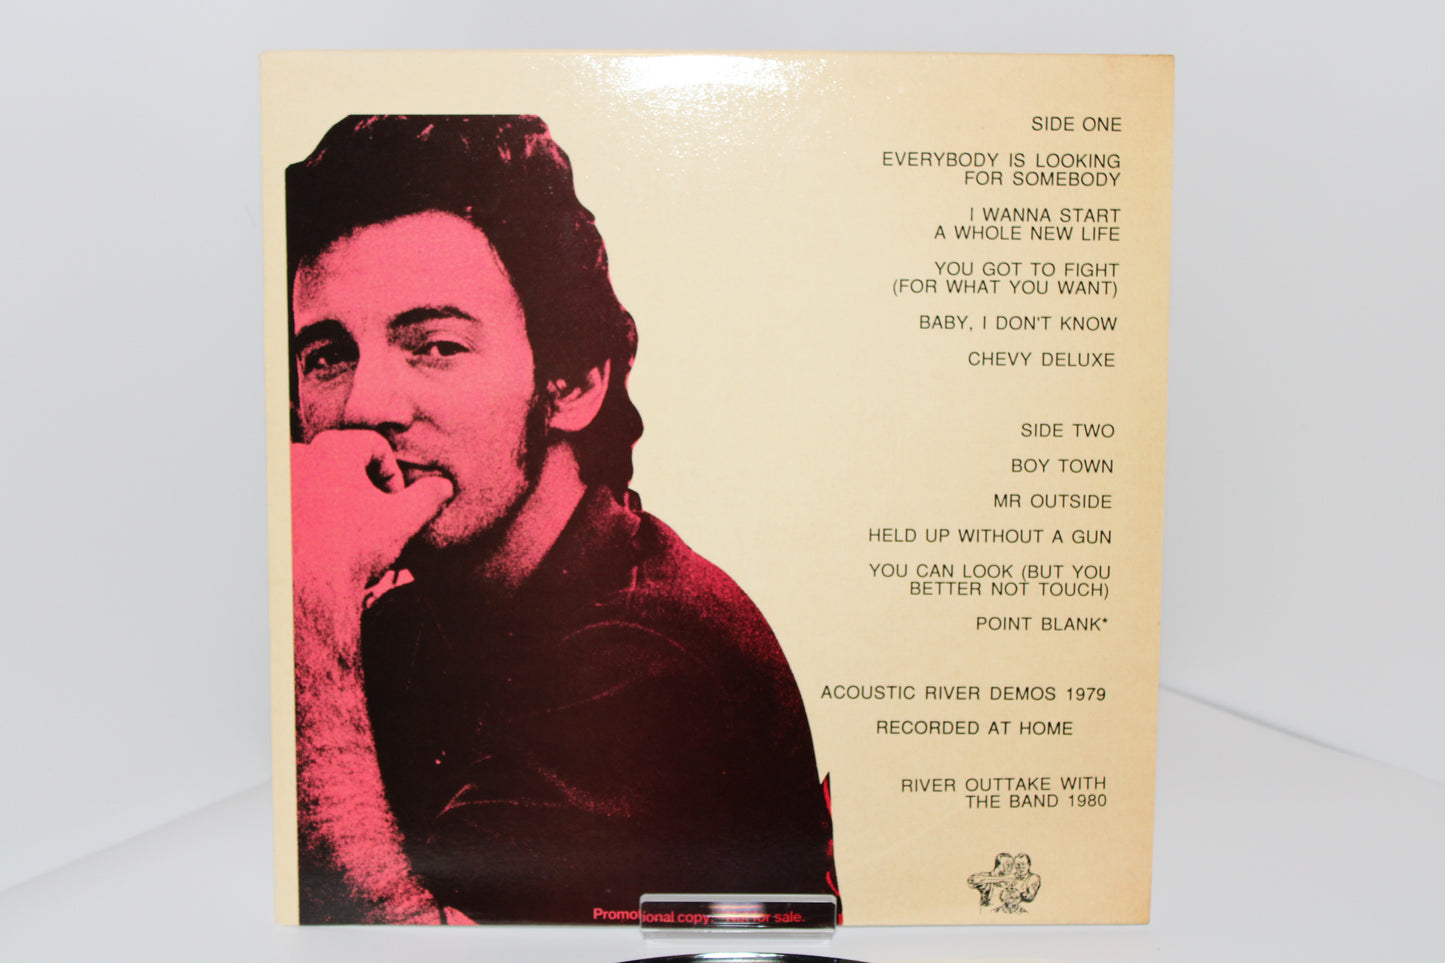 Bruce Springsteen - River Refinery - Bootleg recording at home and outtakes with the band 1980